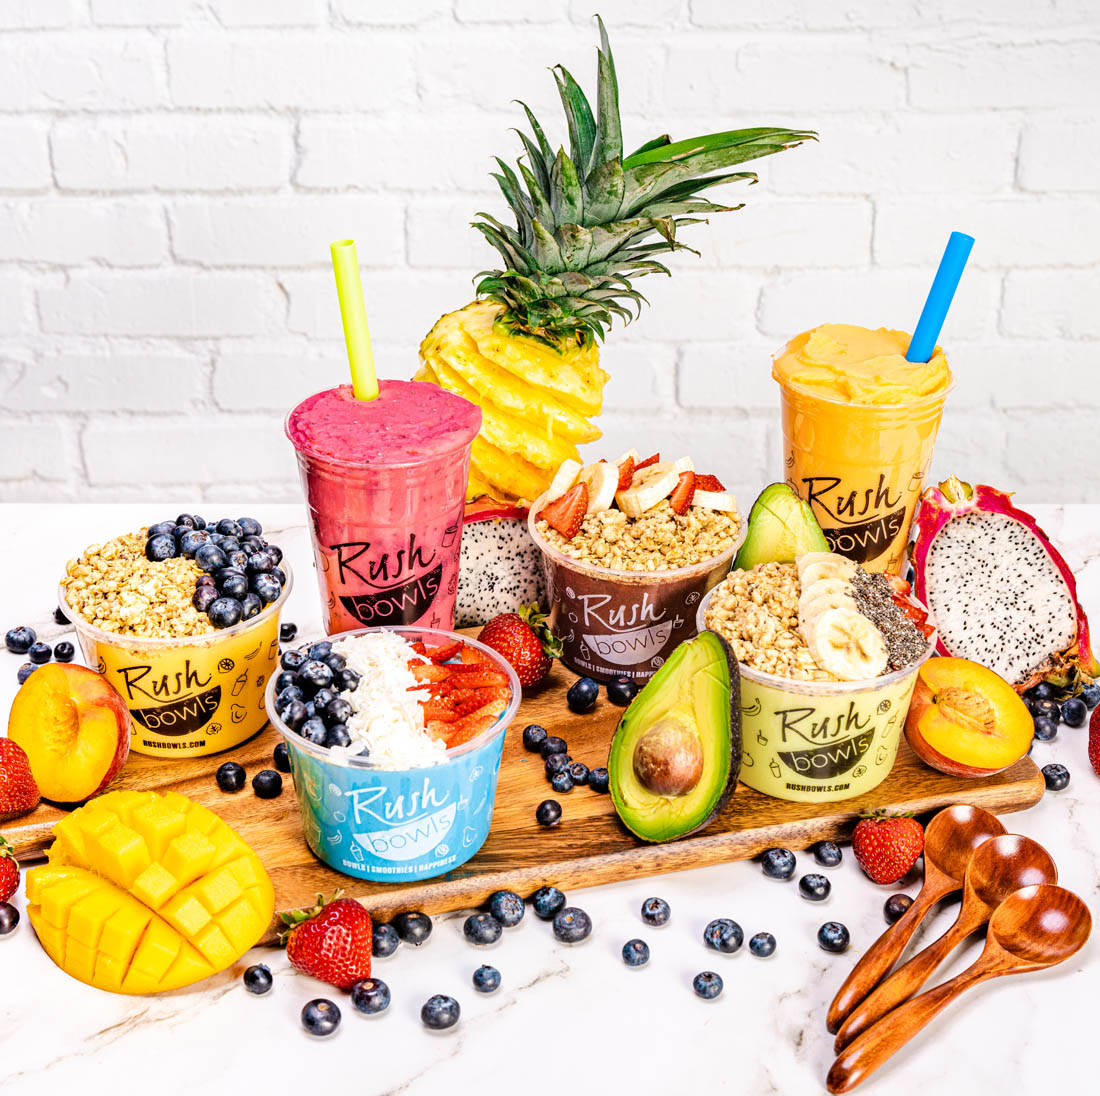 Our bowls are yummy and fresh and always attract a following - learn more about the benefits of self-employment with the Rush Bowls franchise.